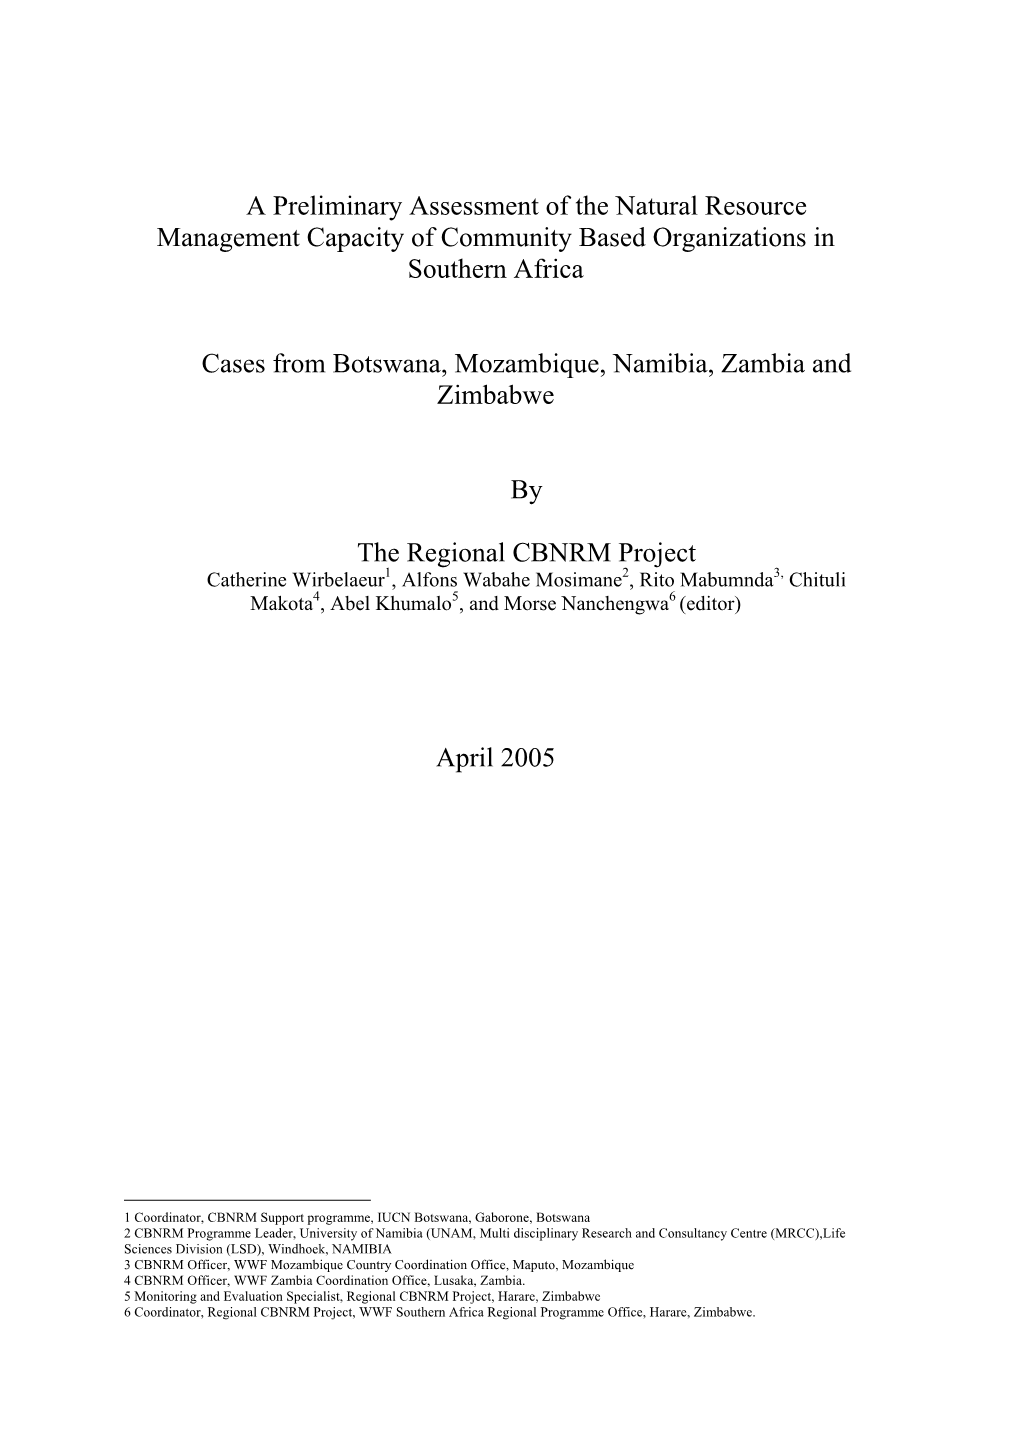 A Preliminary Assessment of the Natural Resource Management Capacity of Community Based Organizations in Southern Africa